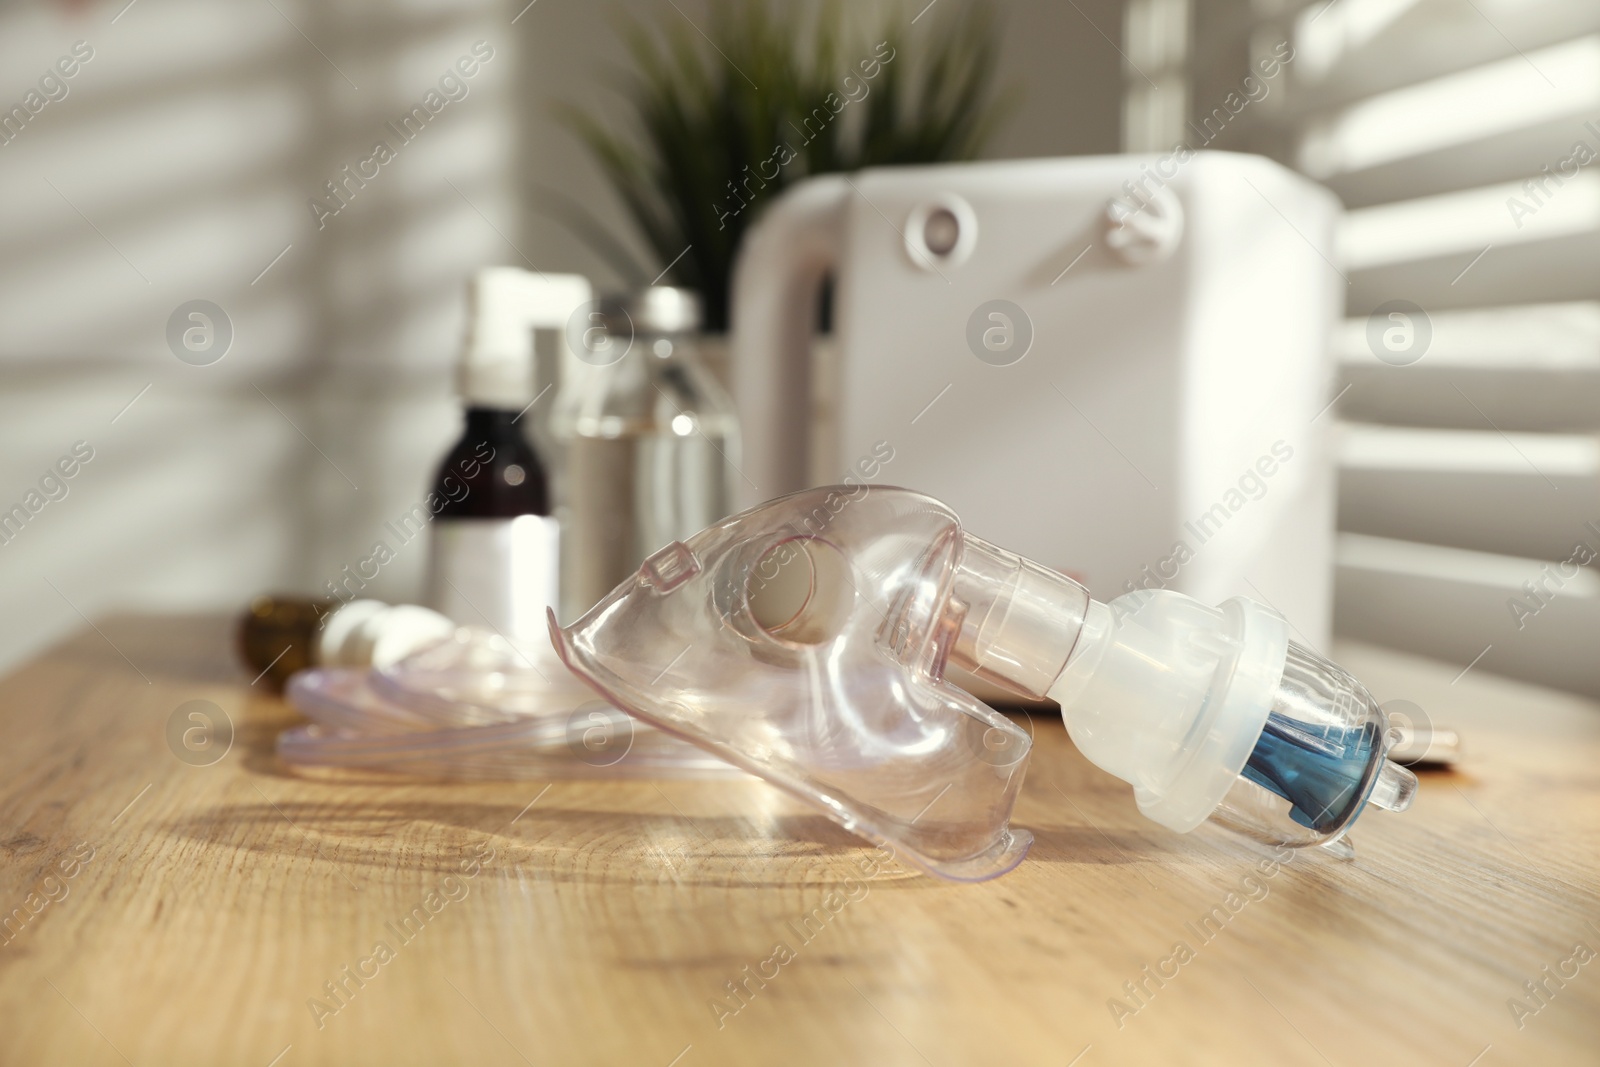 Photo of Face mask near nebulizer and medications on wooden table indoors. Inhalation equipment